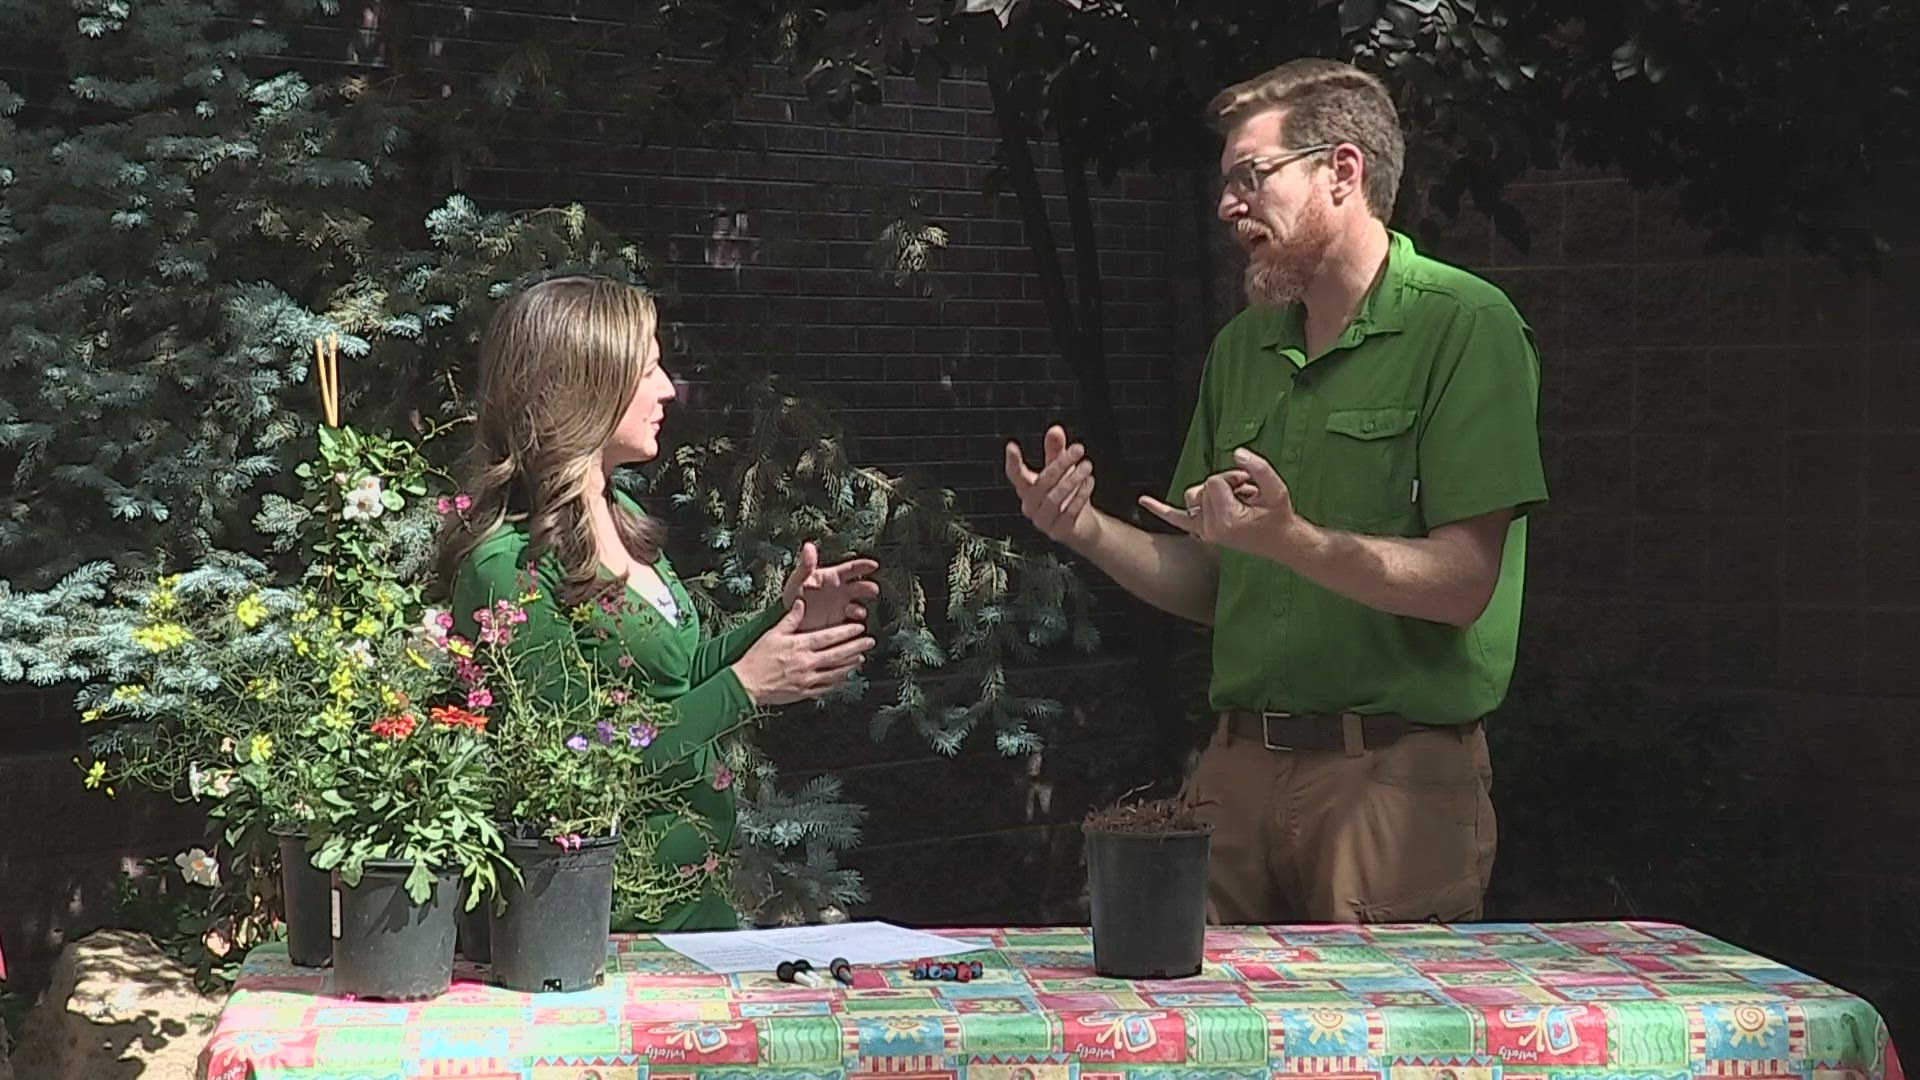 Mike Moore with the Associated Landscape Contractors of Colorado tells us how we can keep our yards and gardens healthy this summer.